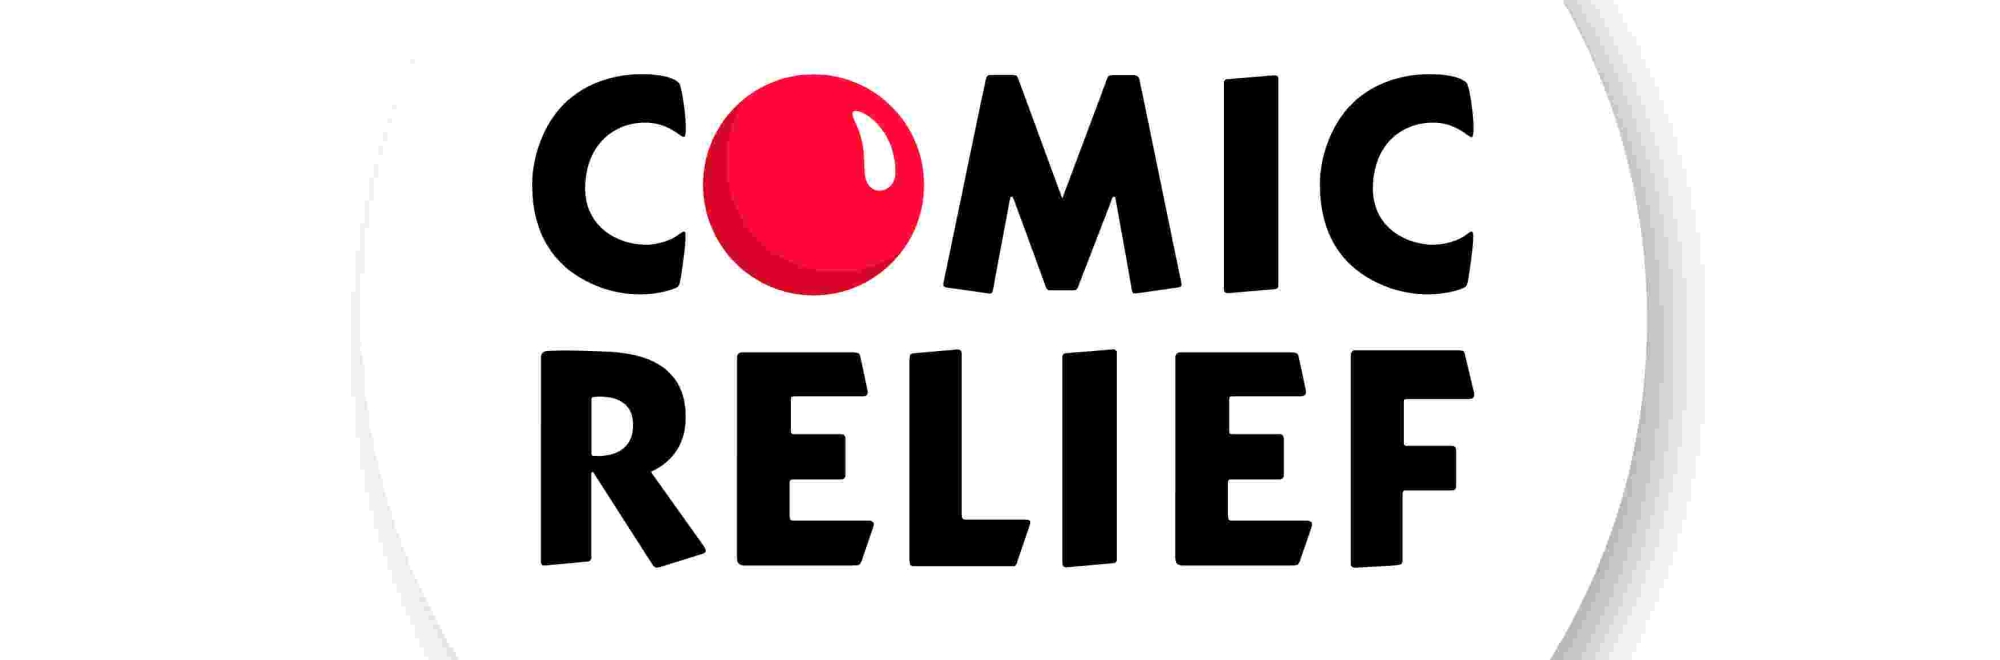 How Comic Relief is redefining western stereotypes of Africa through creativity, authenticity and human-centric narratives